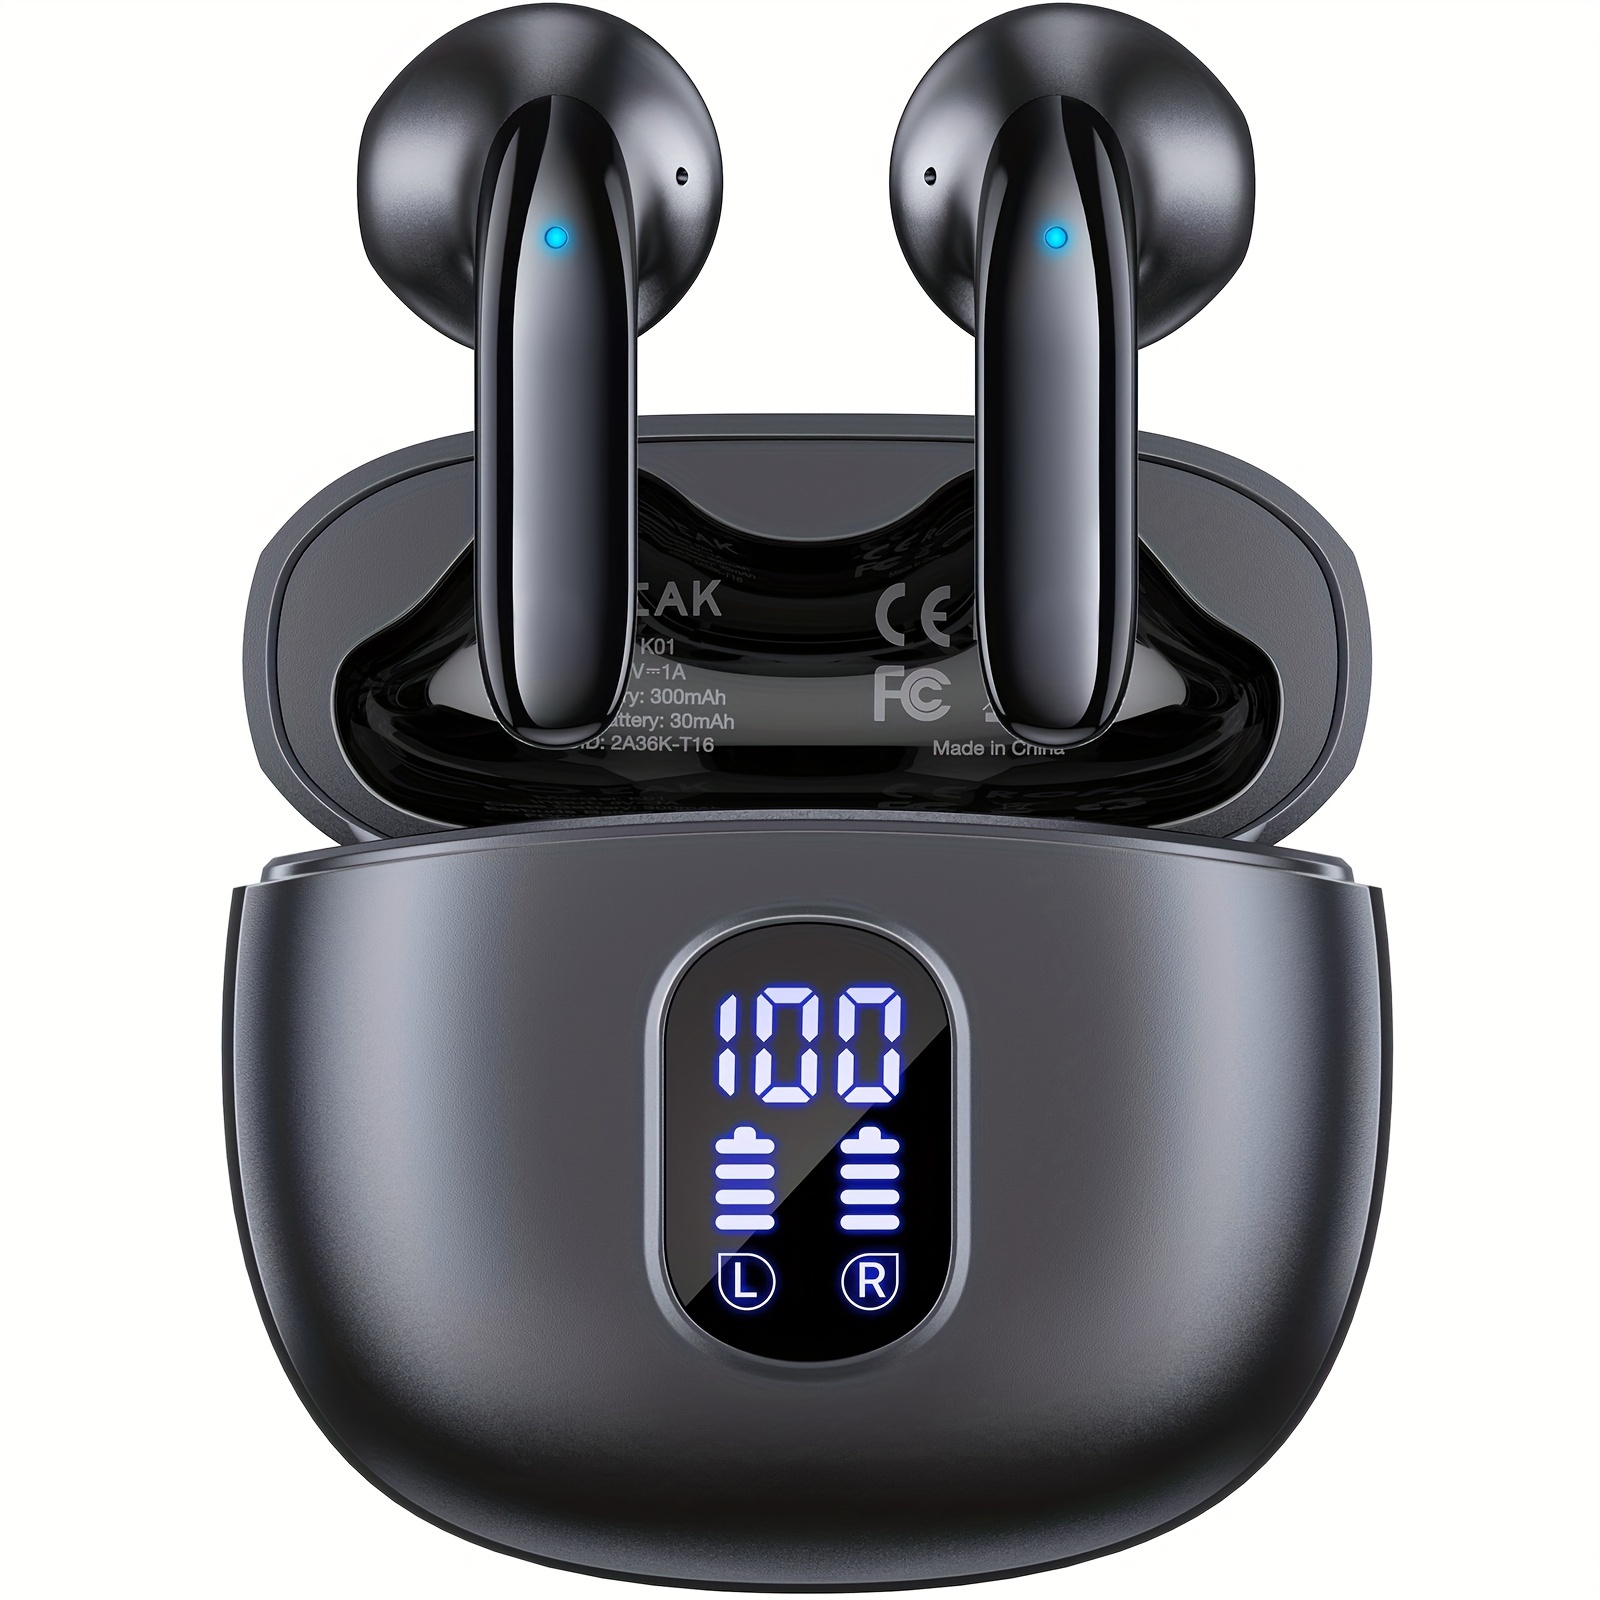 

Wireless Earbuds 40 Hours Playback V5.3 Ear Buds Hifi Stereo In-ear Ear Buds With Led Power Display Touch Control Earphones For Cell Phone Computer Laptop Sports